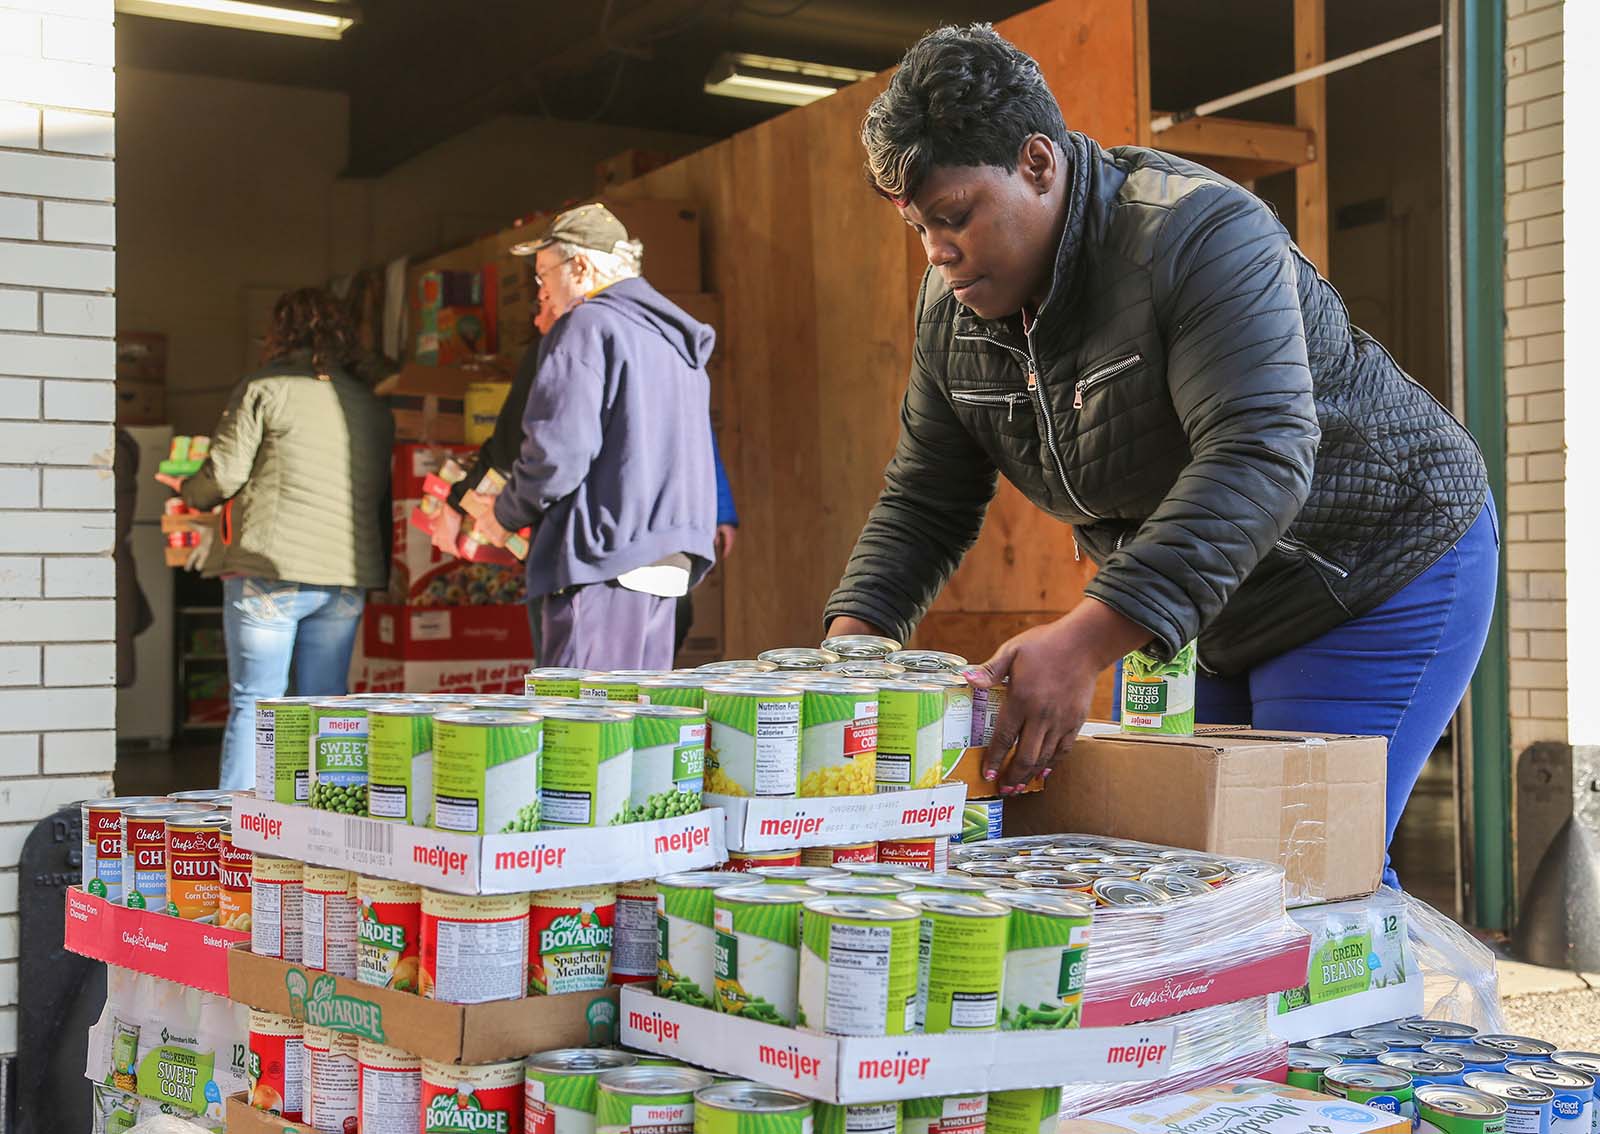 Volunteers organizing canned food donations at a community food bank.